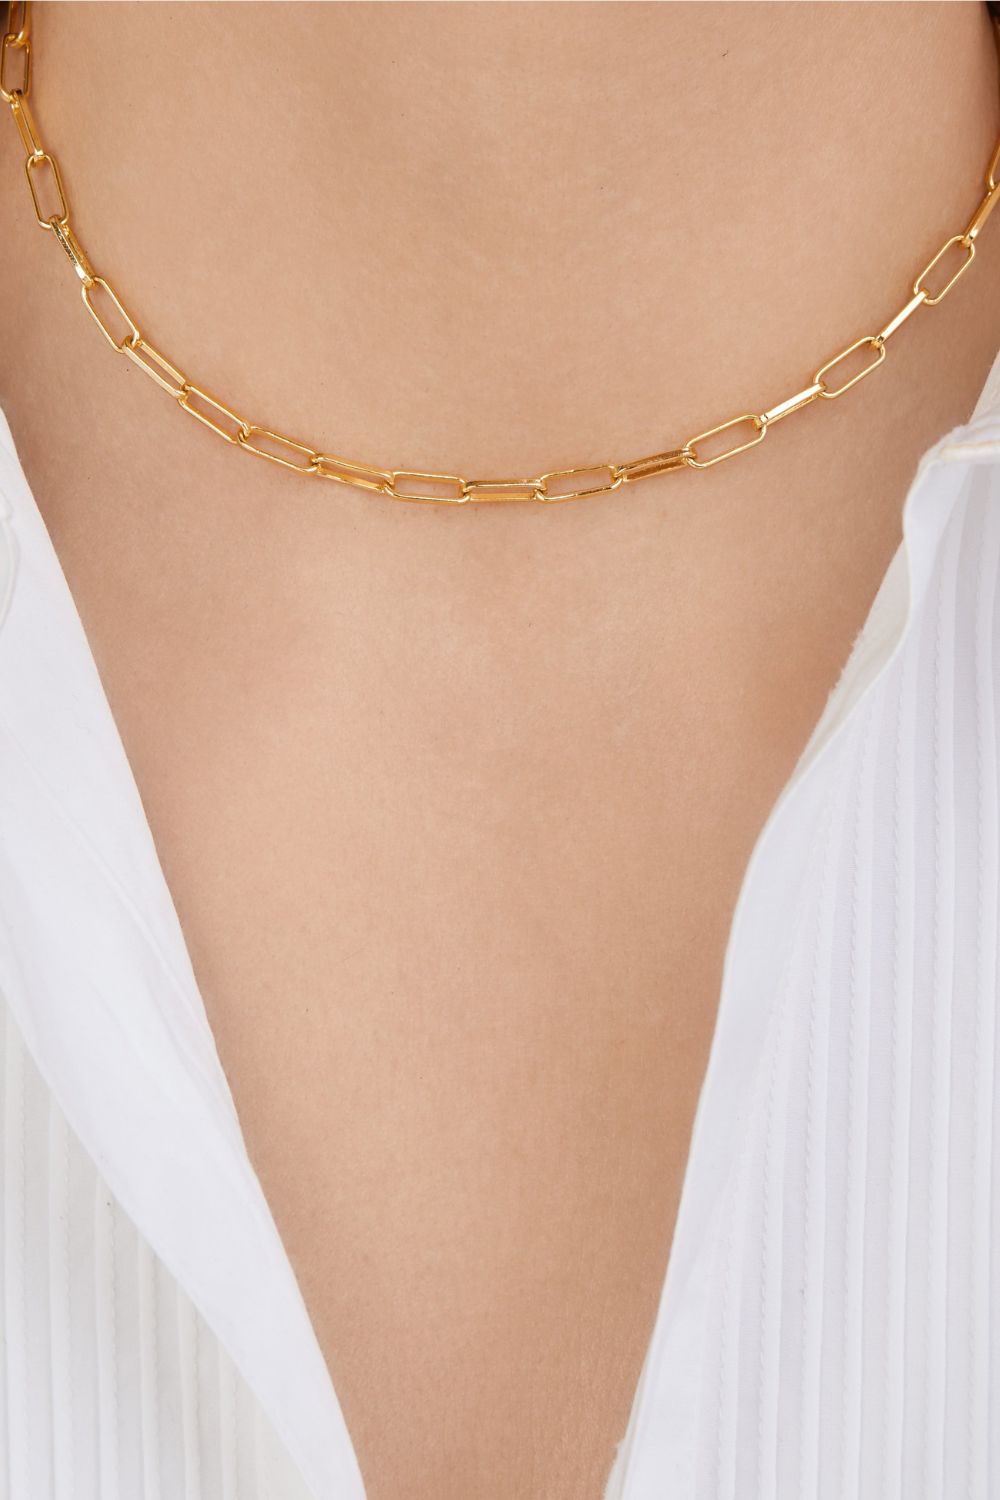 Large link chain gold plated